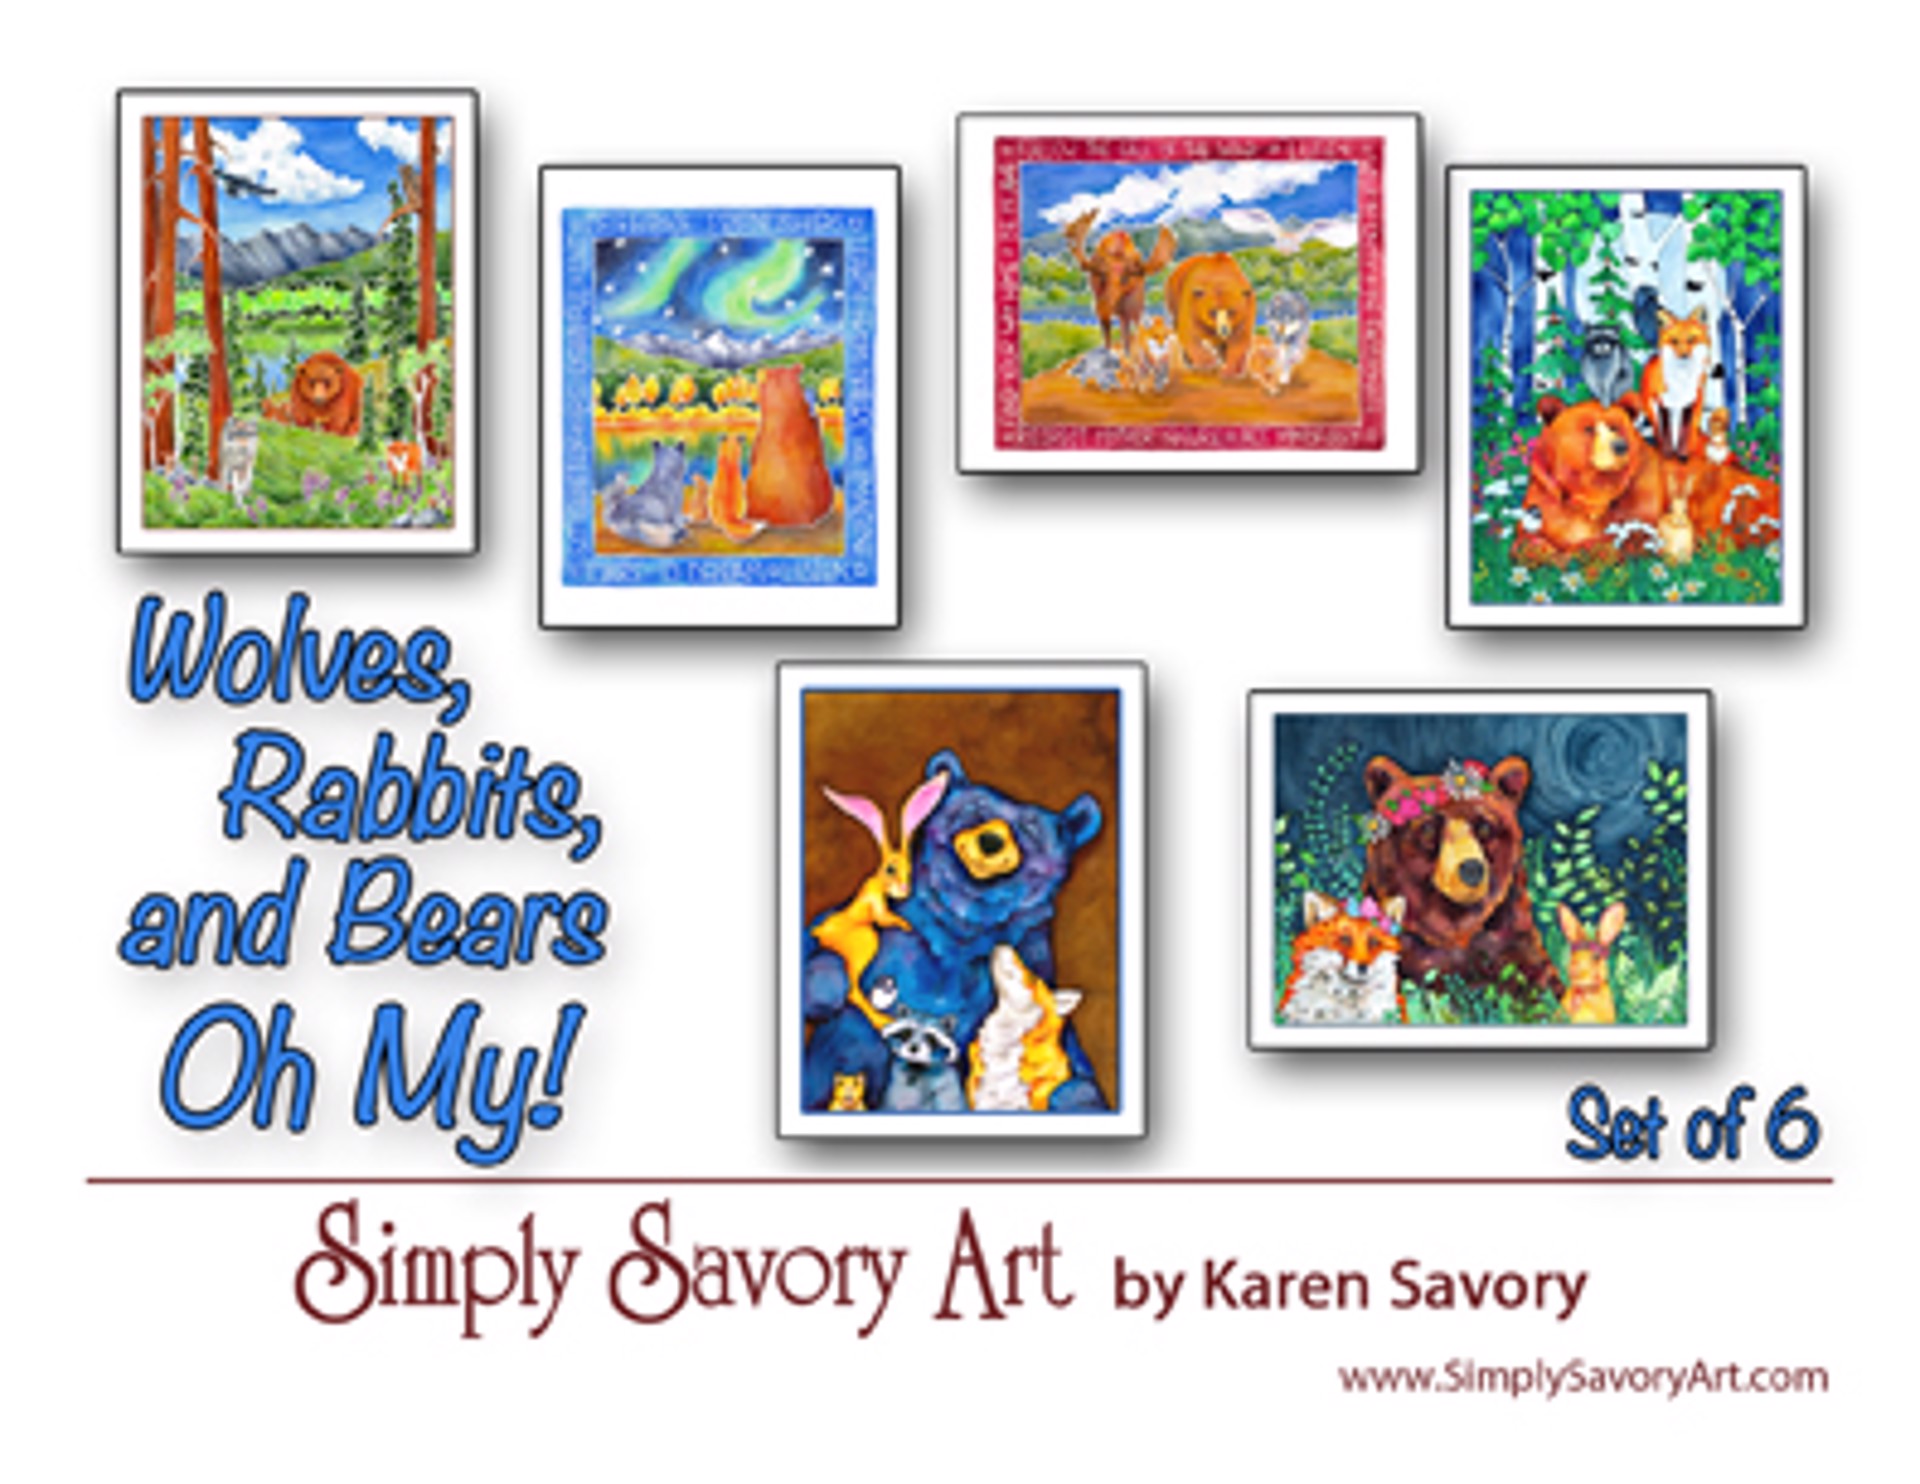 Wolves, Rabbits, and Bears Art Card Pack by Karen Savory